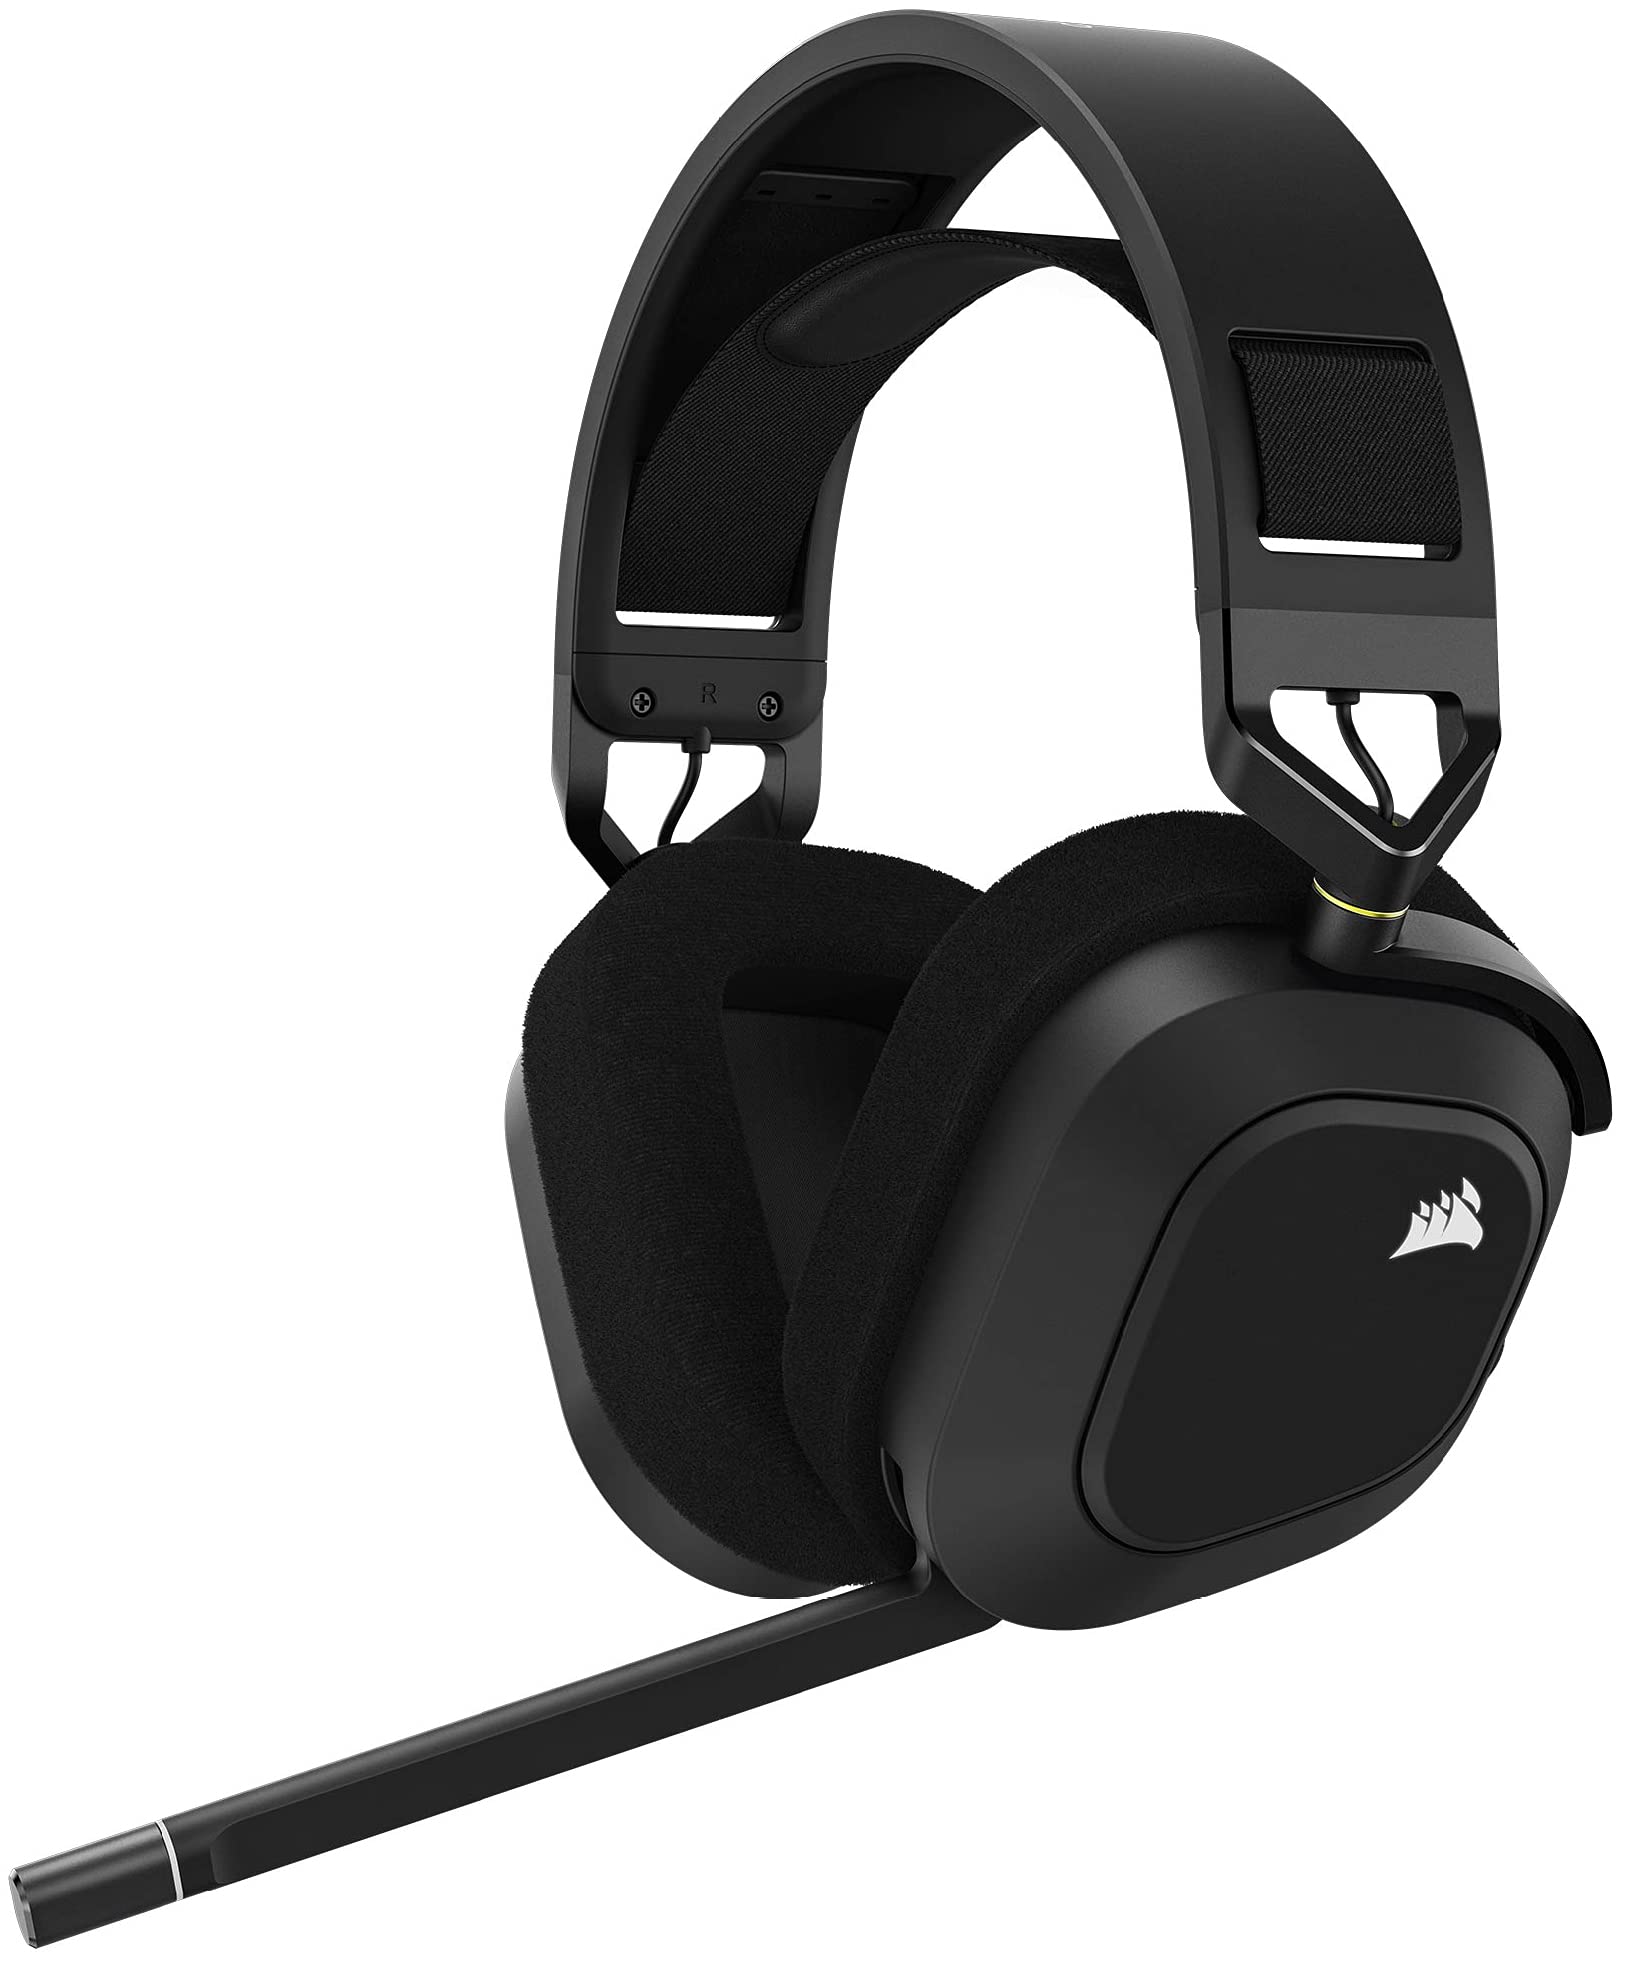 Corsair HS80 RGB Wireless Premium Gaming Headset with Spatial Audio - Works with Mac, PC, PS5, PS4 - Carbon & MM700 RGB Extended Cloth Gaming Mouse Pad